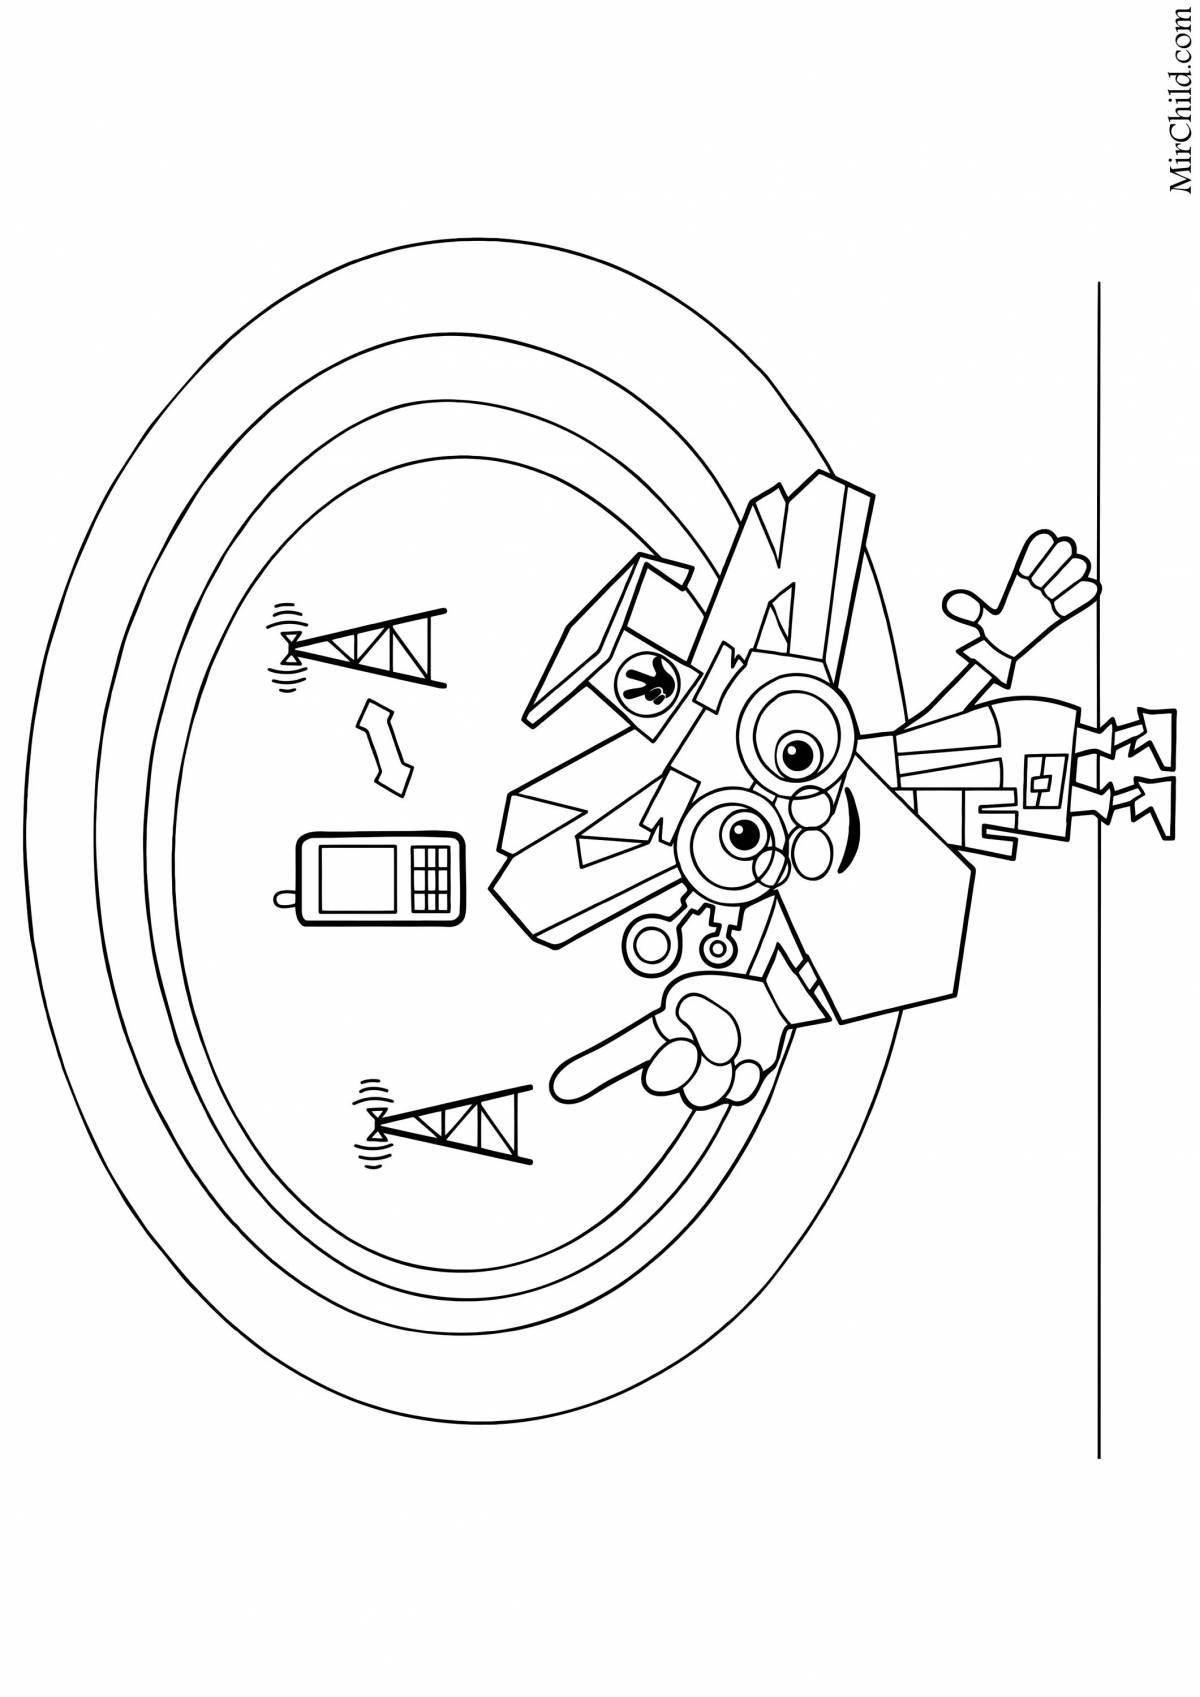 Coloring page funny freak and geek